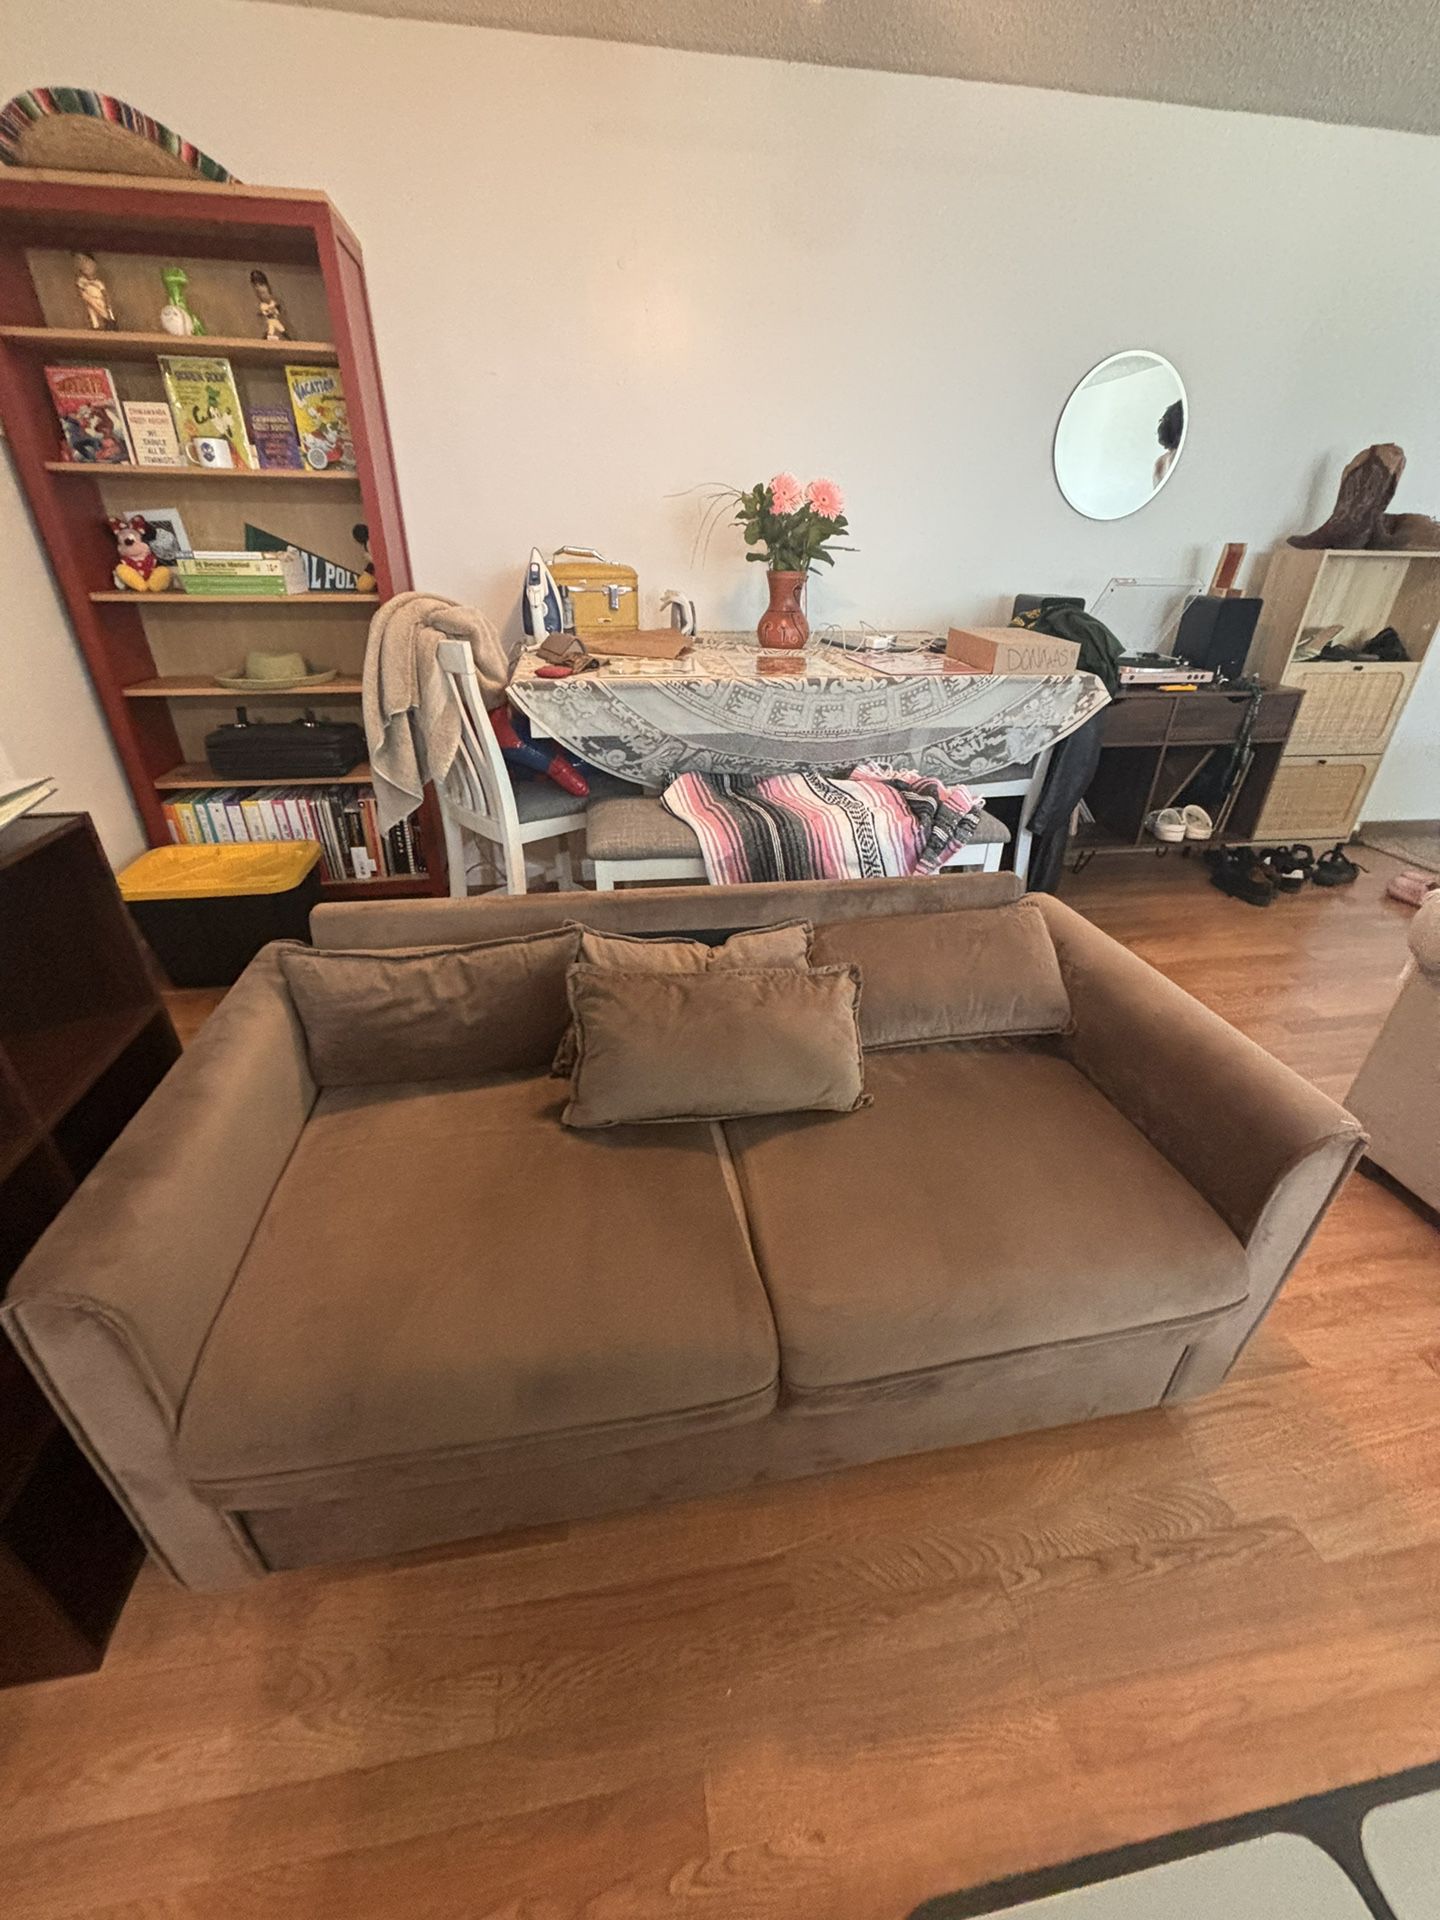 59” Soft/Cozy Brown Couch